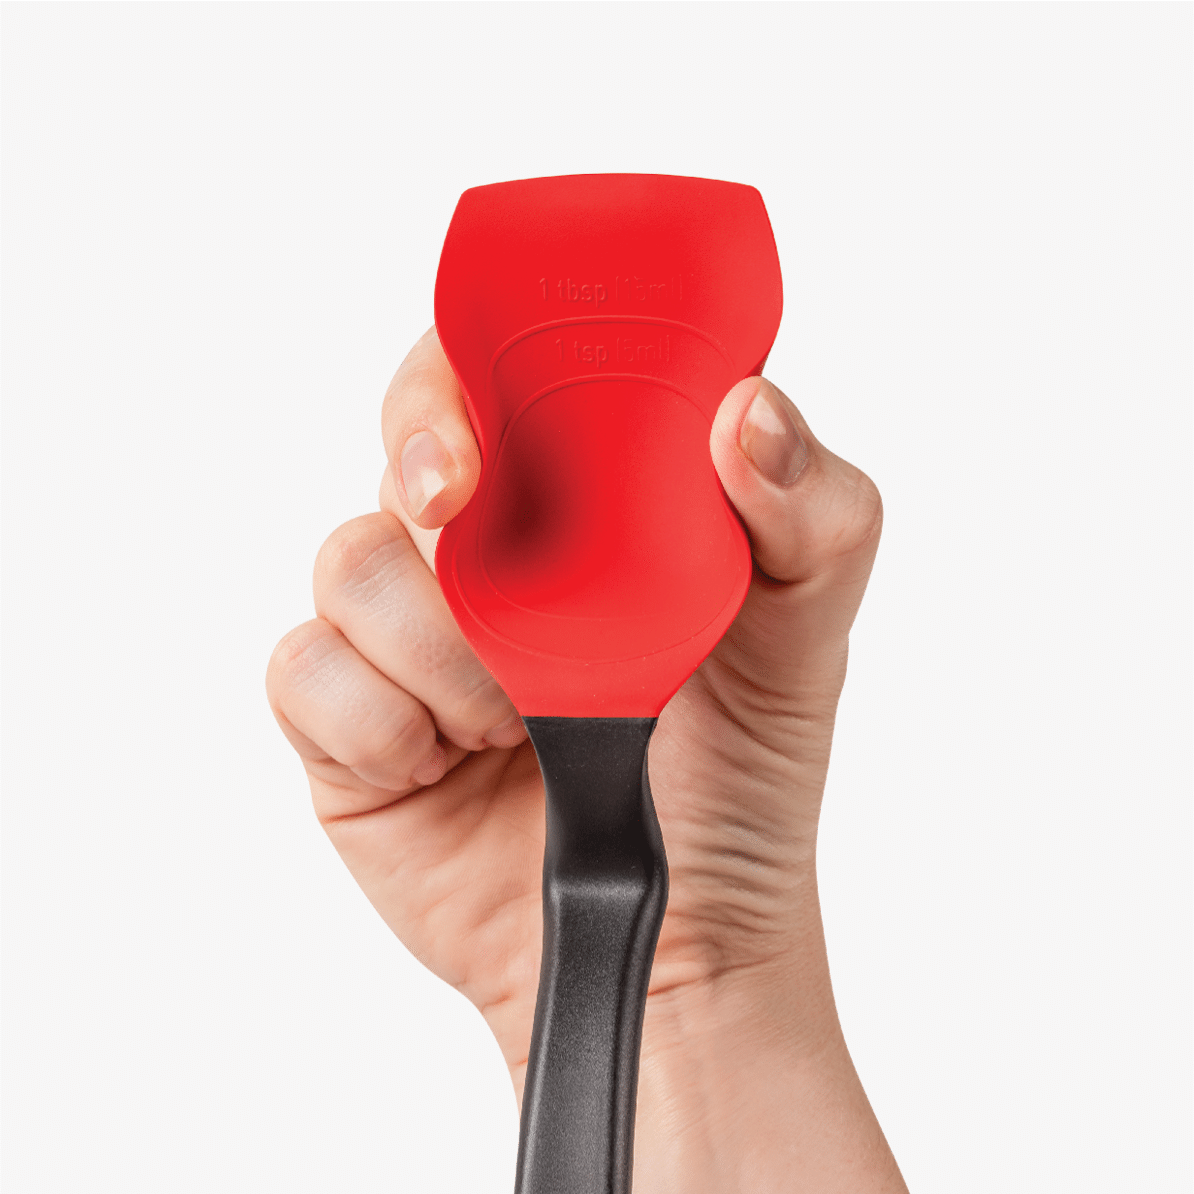 Supoon is the world’s best cooking spoon. It has a flat squeegee tip and flexible sides to scrape your pan or bowl clean, a deep scooping head, measures teaspoons and tablespoons, and its clever handle design is like having a built-in spoon rest so your Supoon’s head sits up off your bench. Color is red.